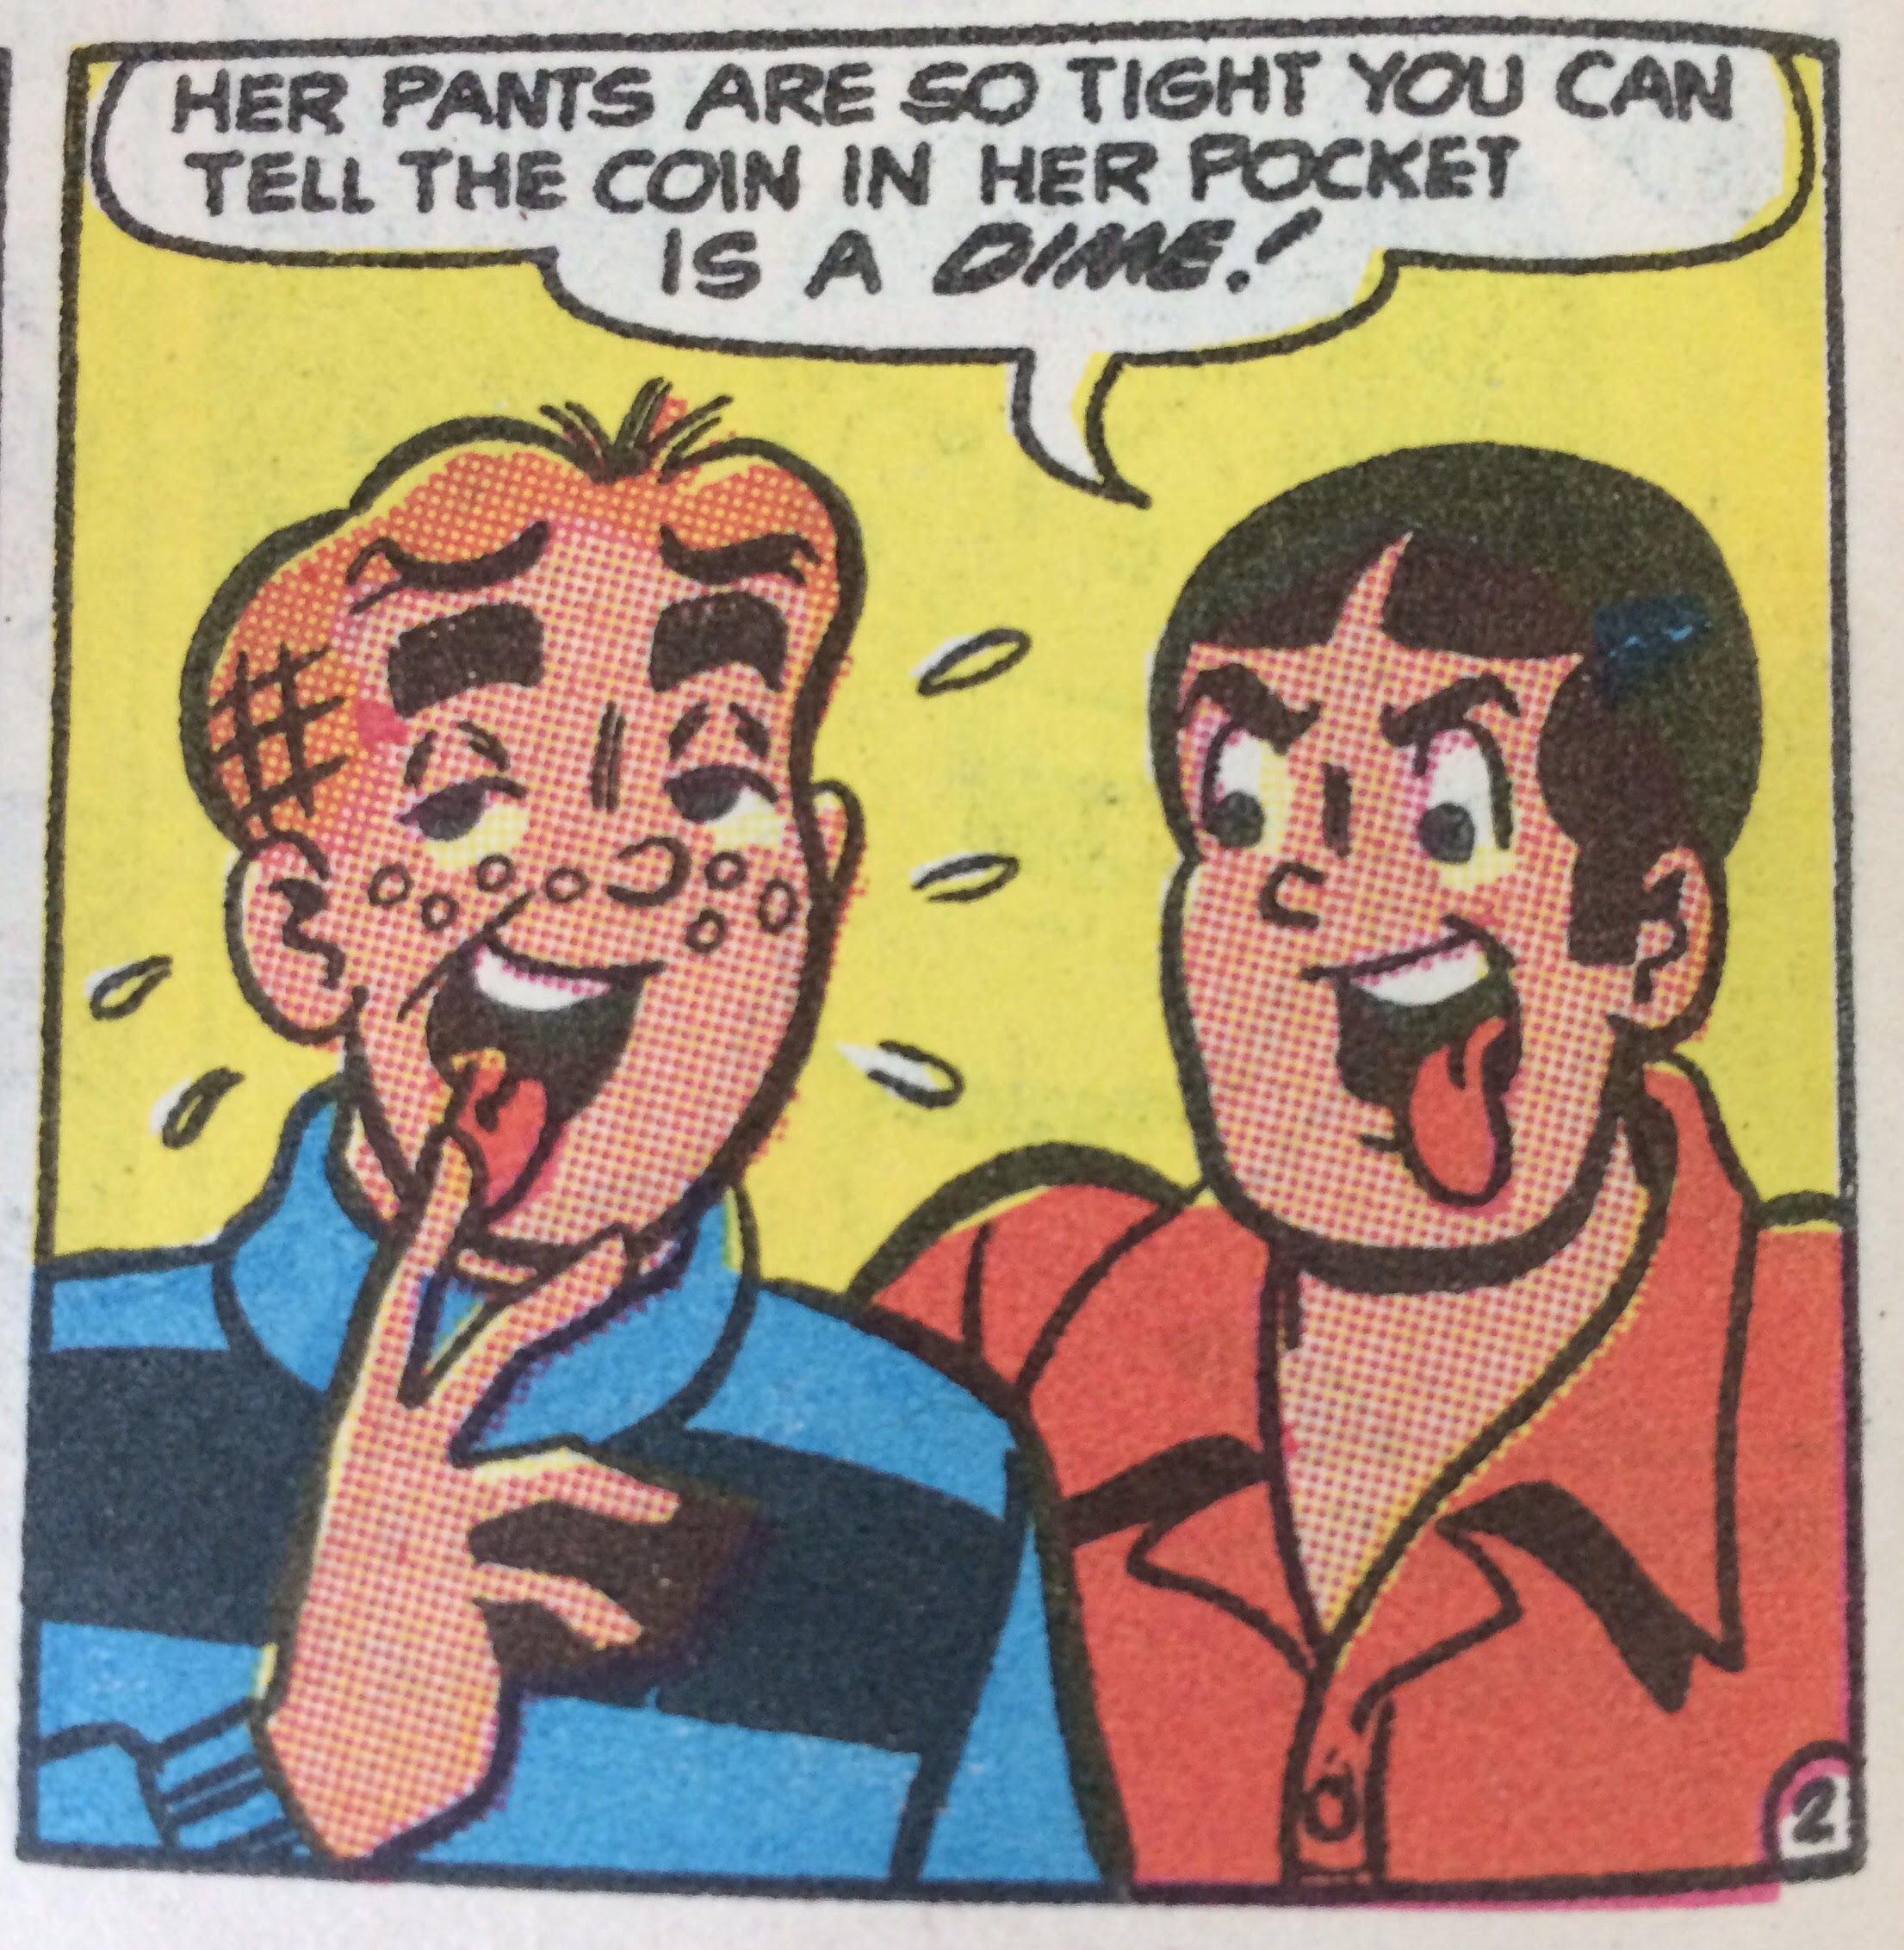 Archie comics accurately representing the average 17-year-old male.